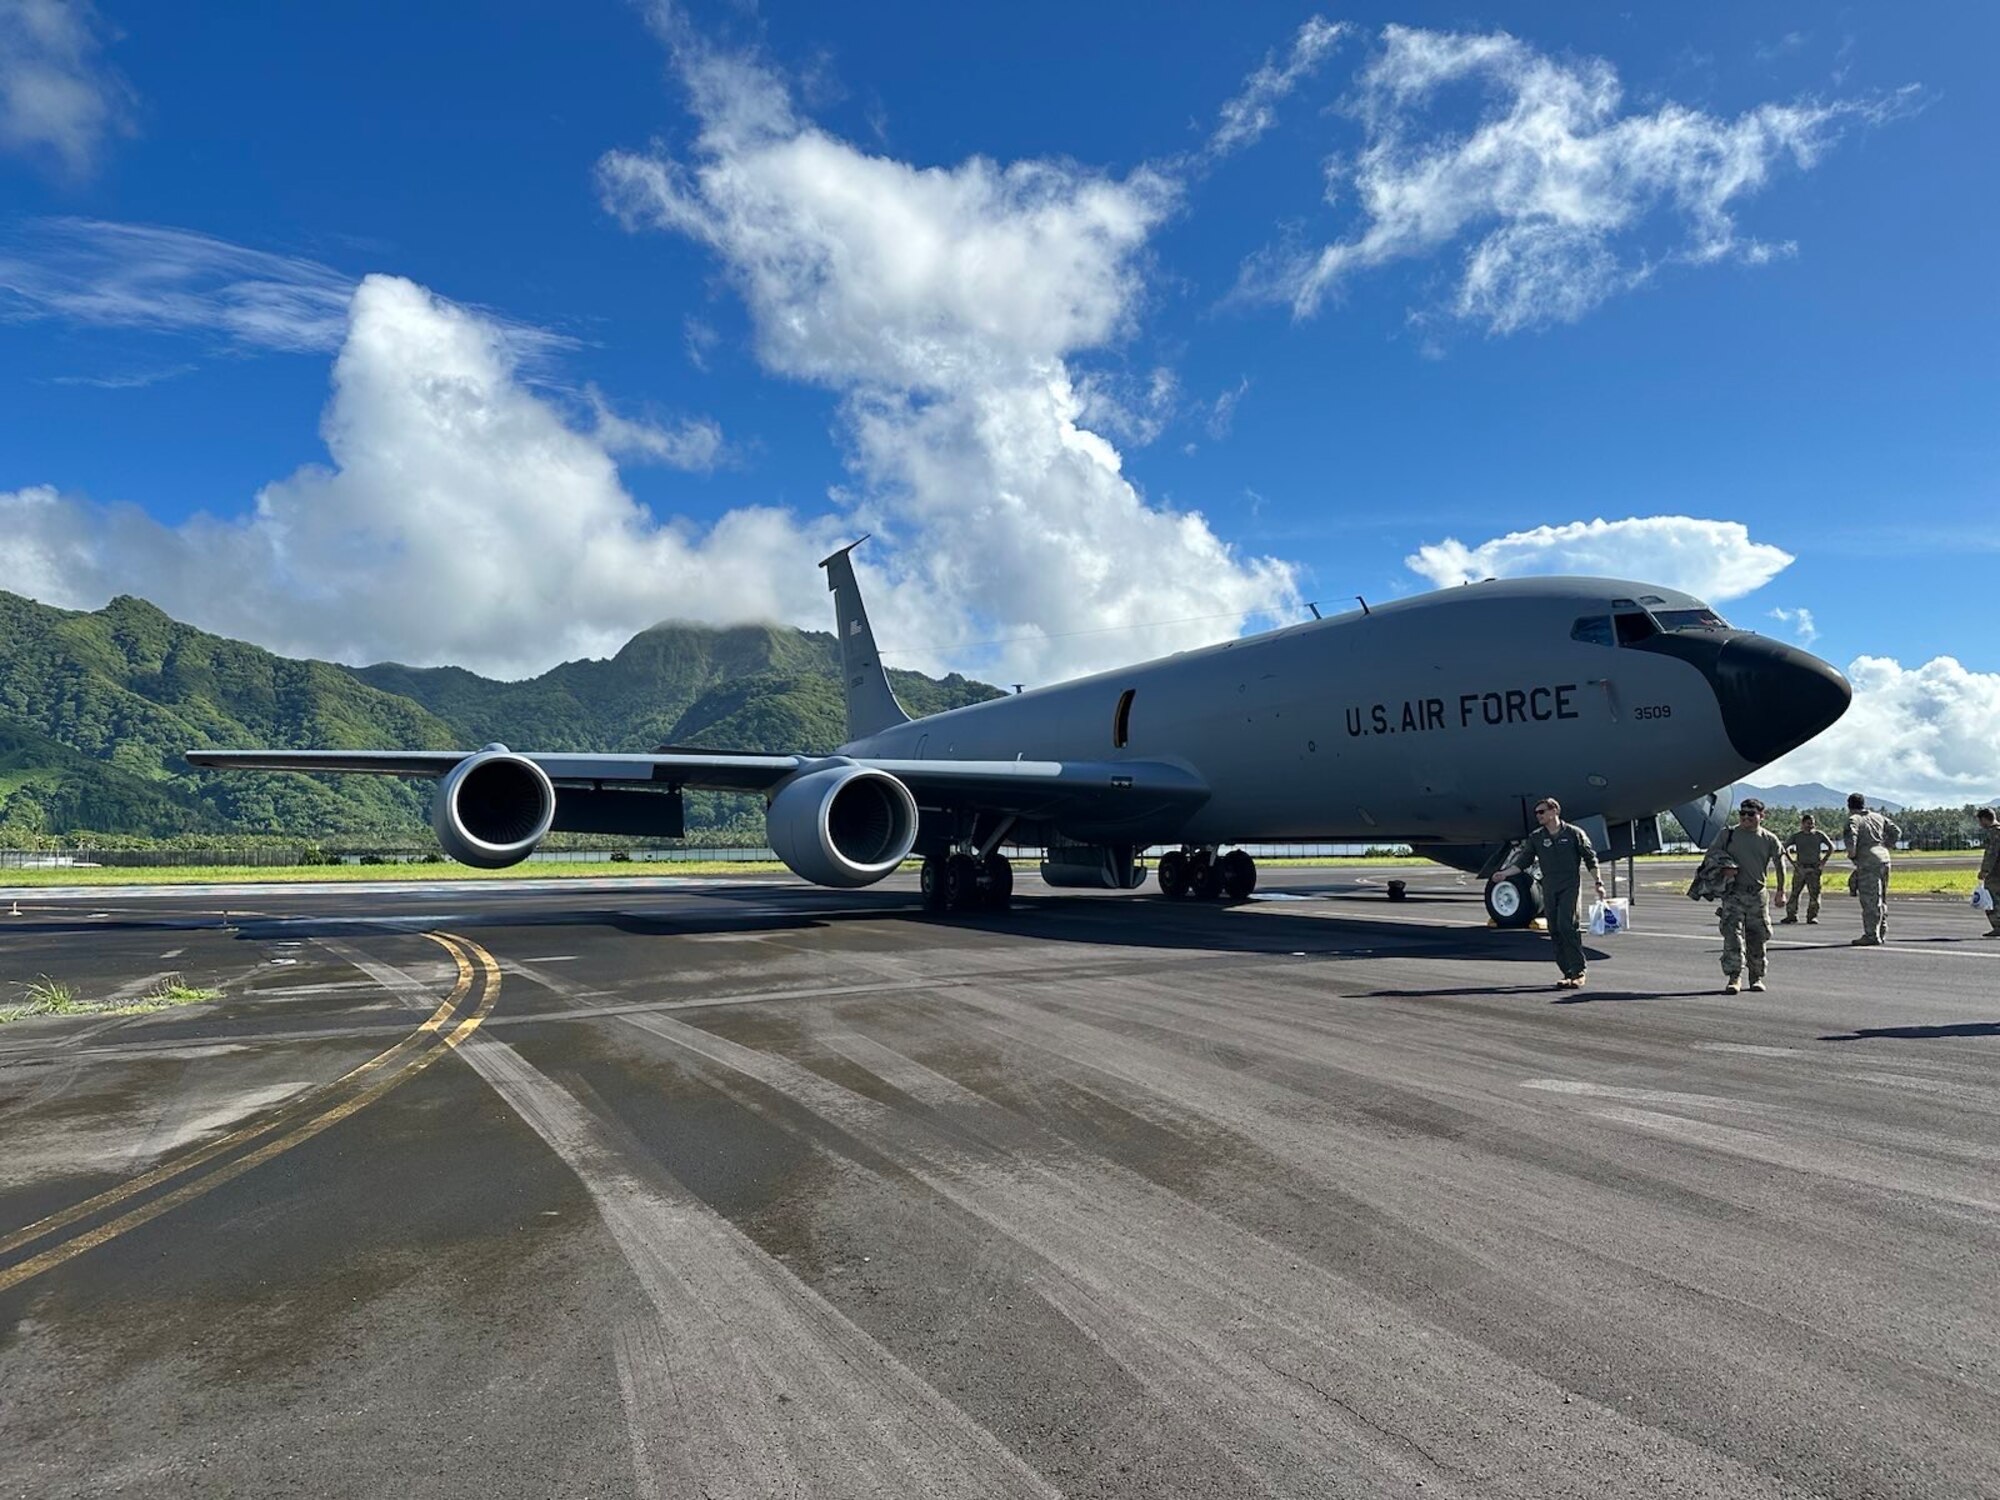 U.S. Air Force Airman walk away from their KC-135 Stratotanker after landing in Pago Pago, American Samoa during a hot-pit site survey mission, January 2023. The primary goal was locating and certifying landing locations suitable for hot-pit refueling. (U.S. Air Force courtesy photo)